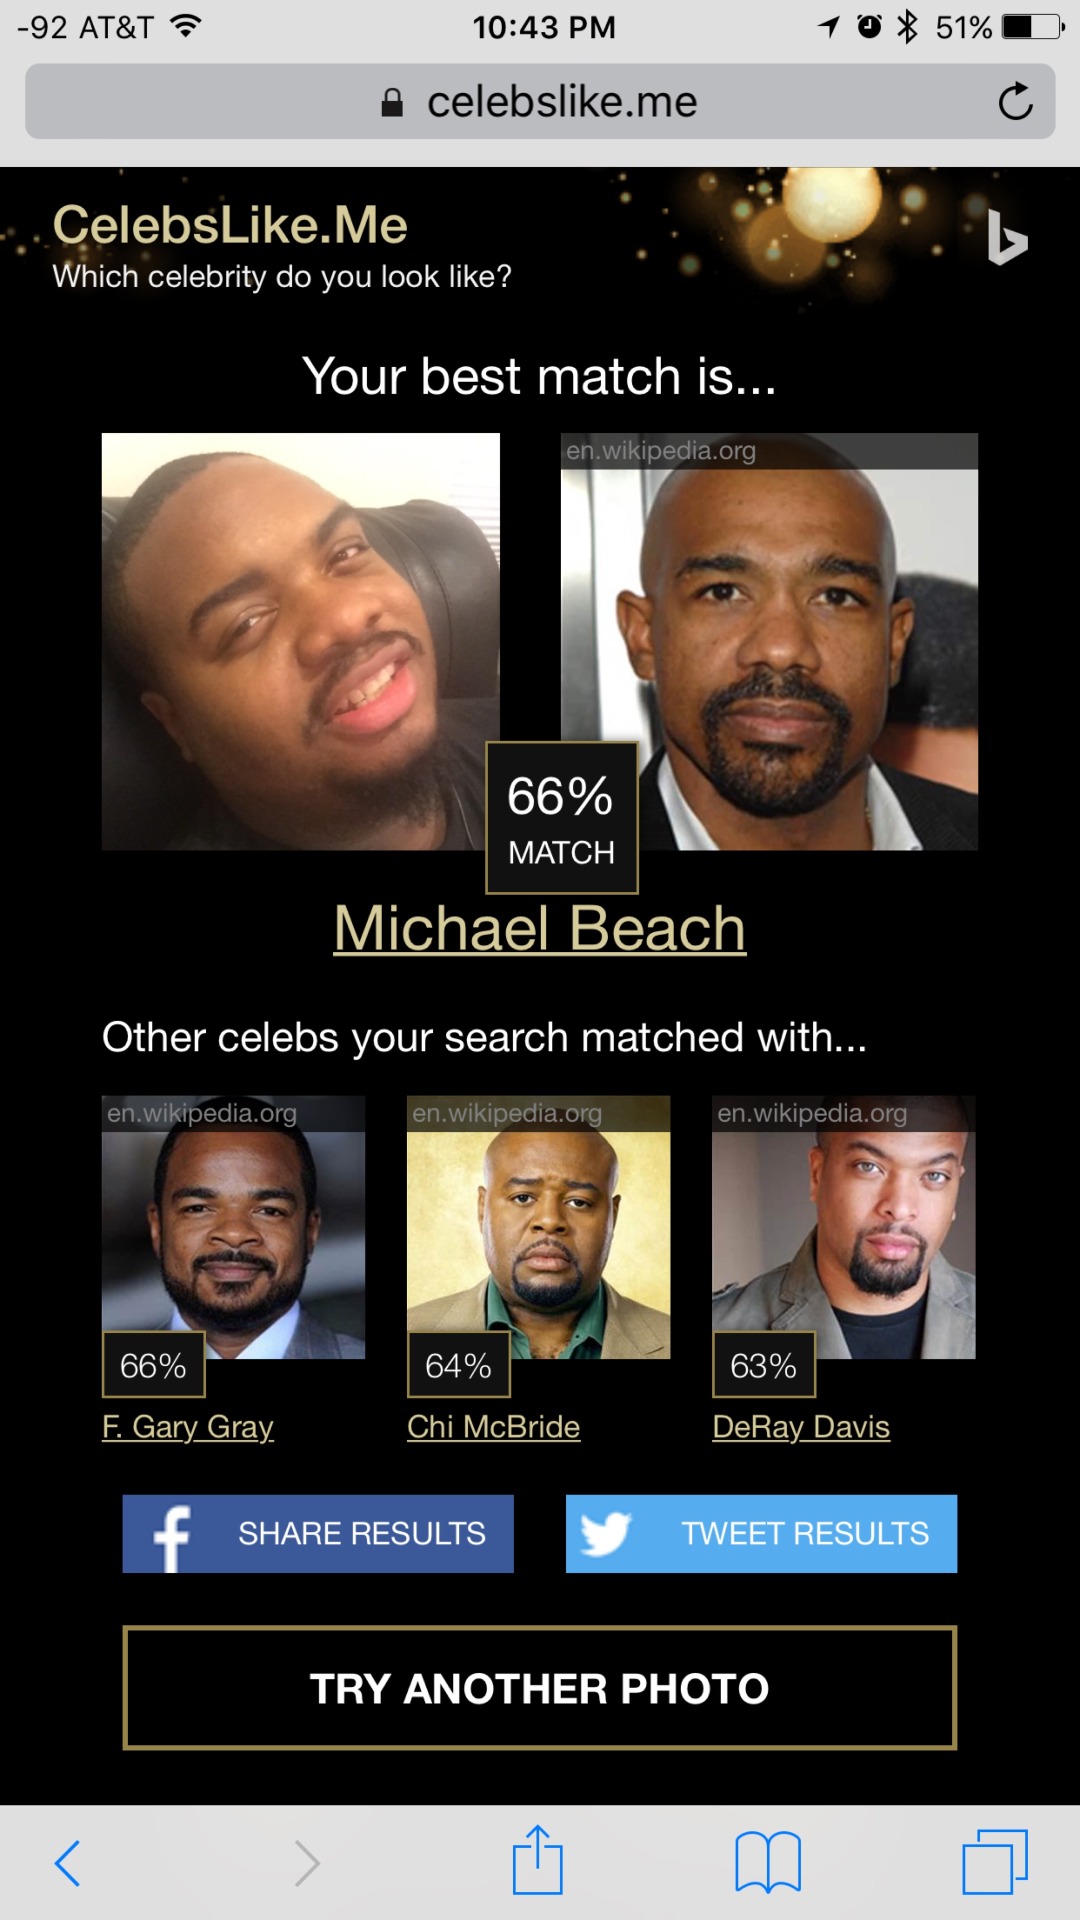 Pretty accurate, though no one is confusing me for DeRay lol